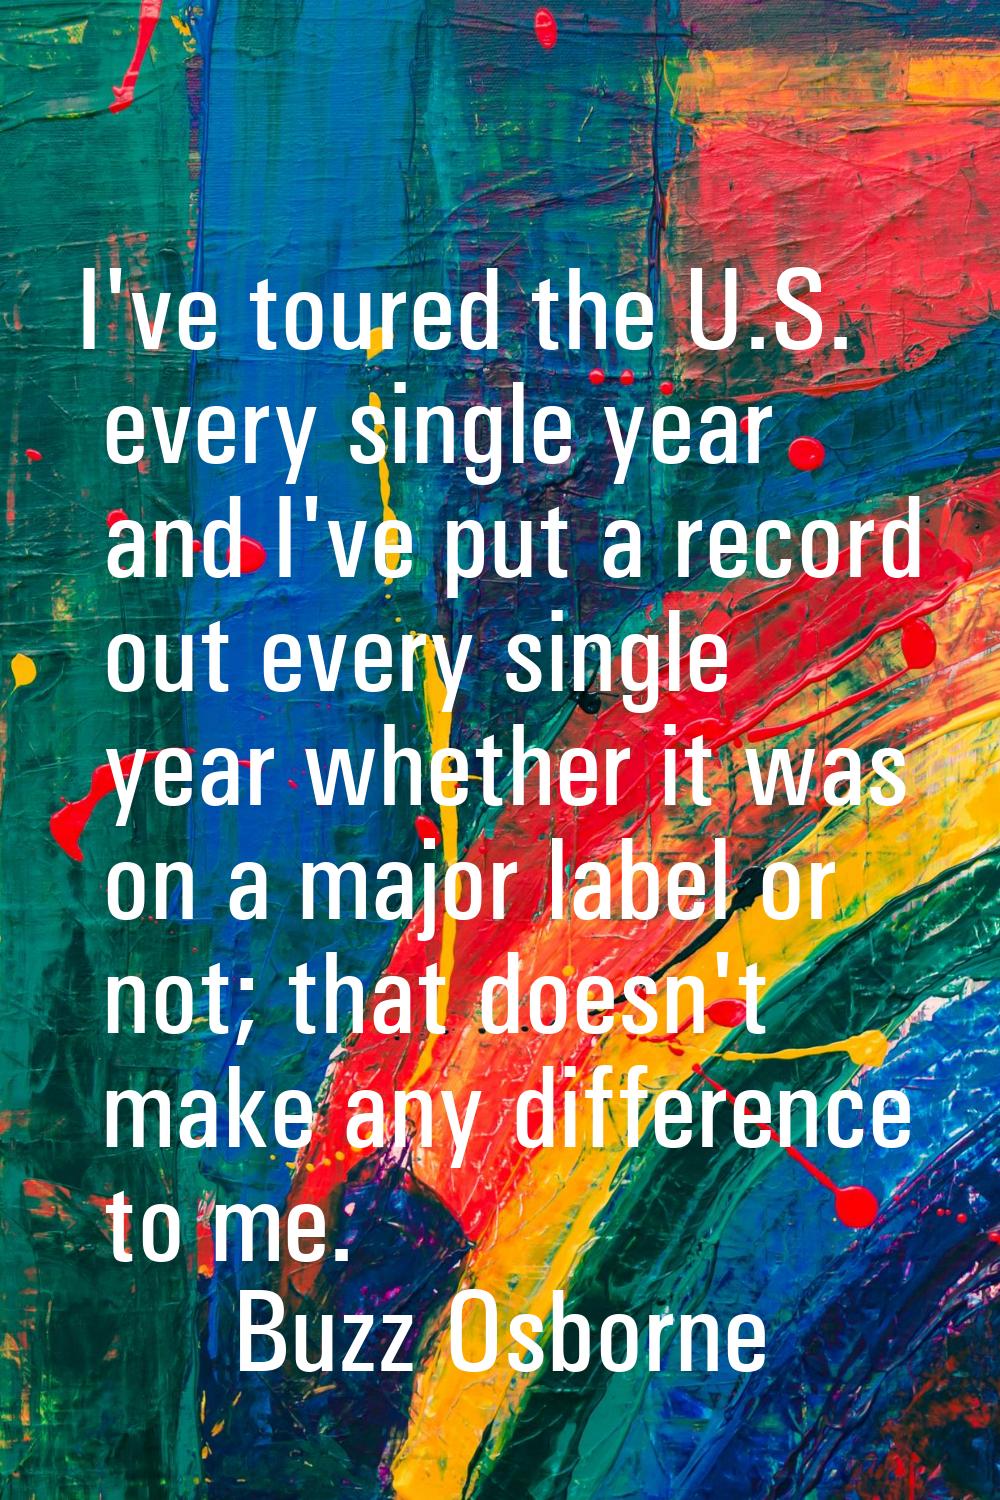 I've toured the U.S. every single year and I've put a record out every single year whether it was o